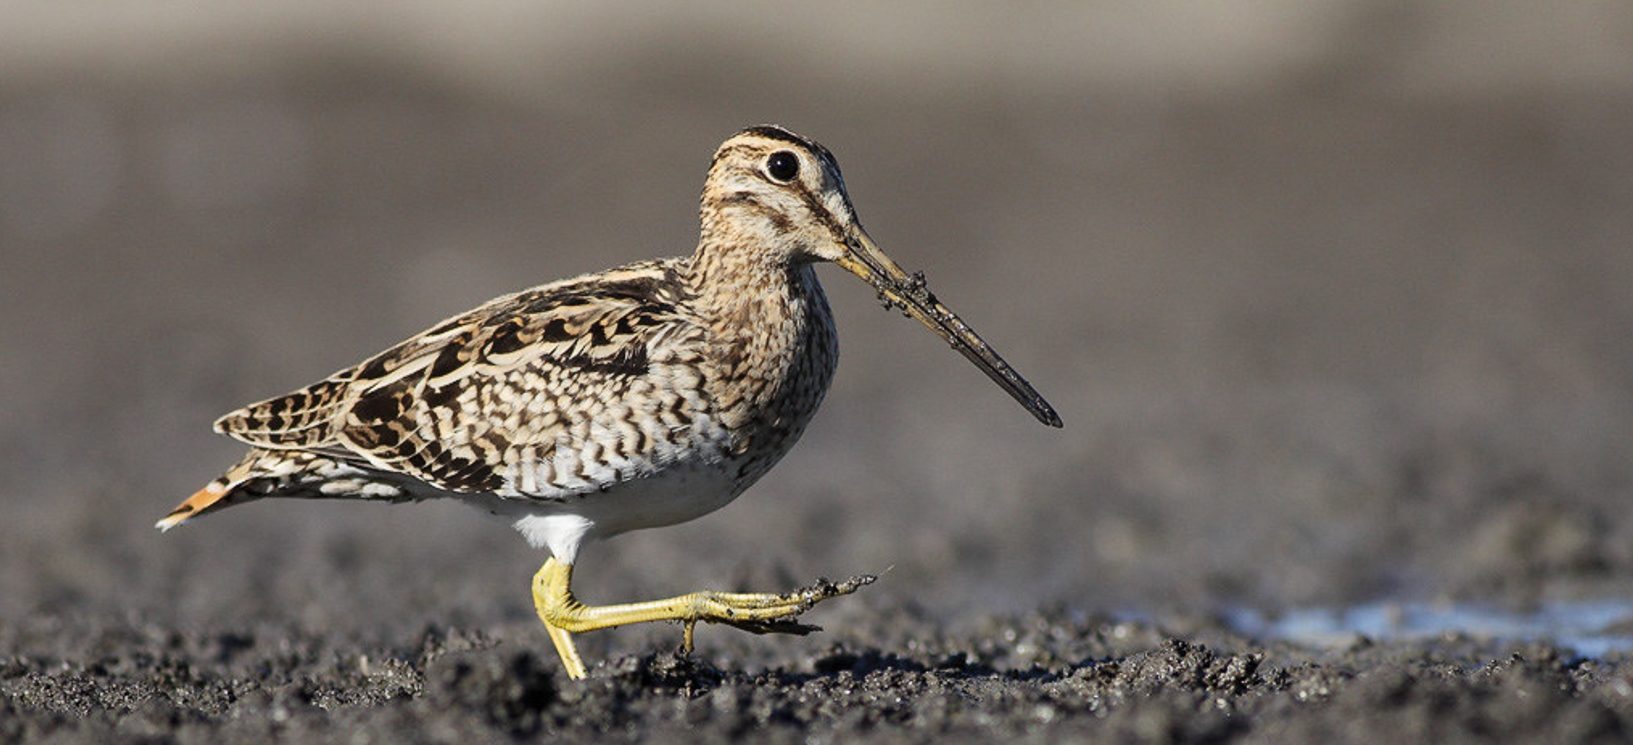 The Latham's snipe migrates 8500km from Hokkadio, Japan, to Jerrabomberra Wetlands annually in spring.